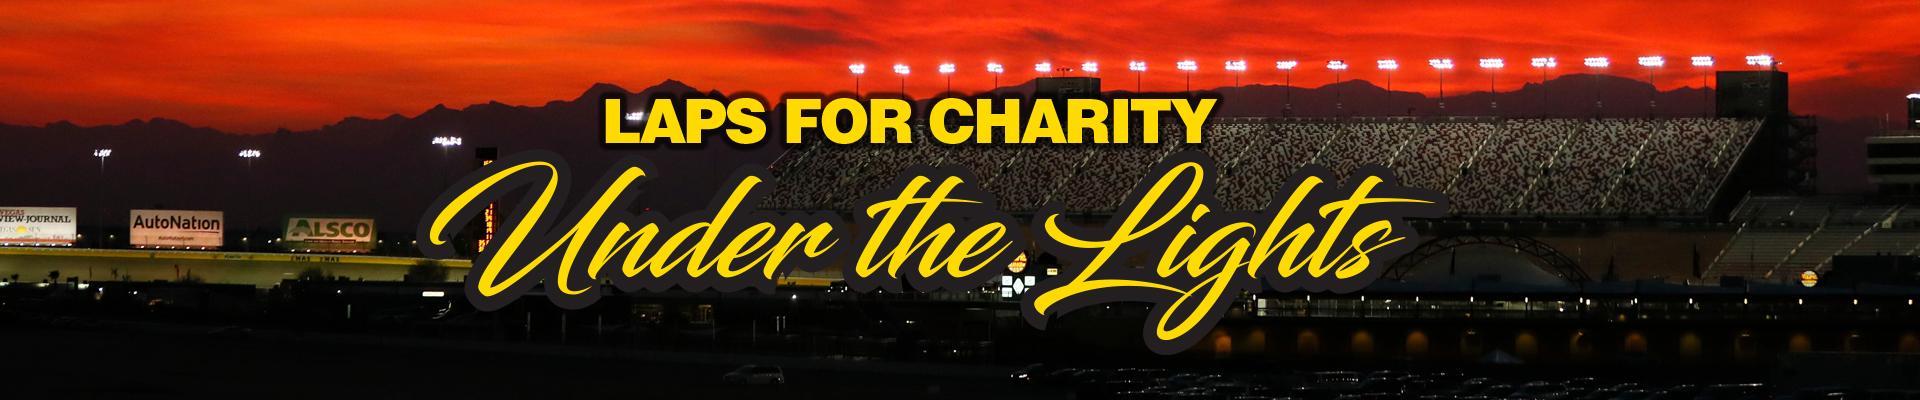 Laps for Charity Under the Lights Header